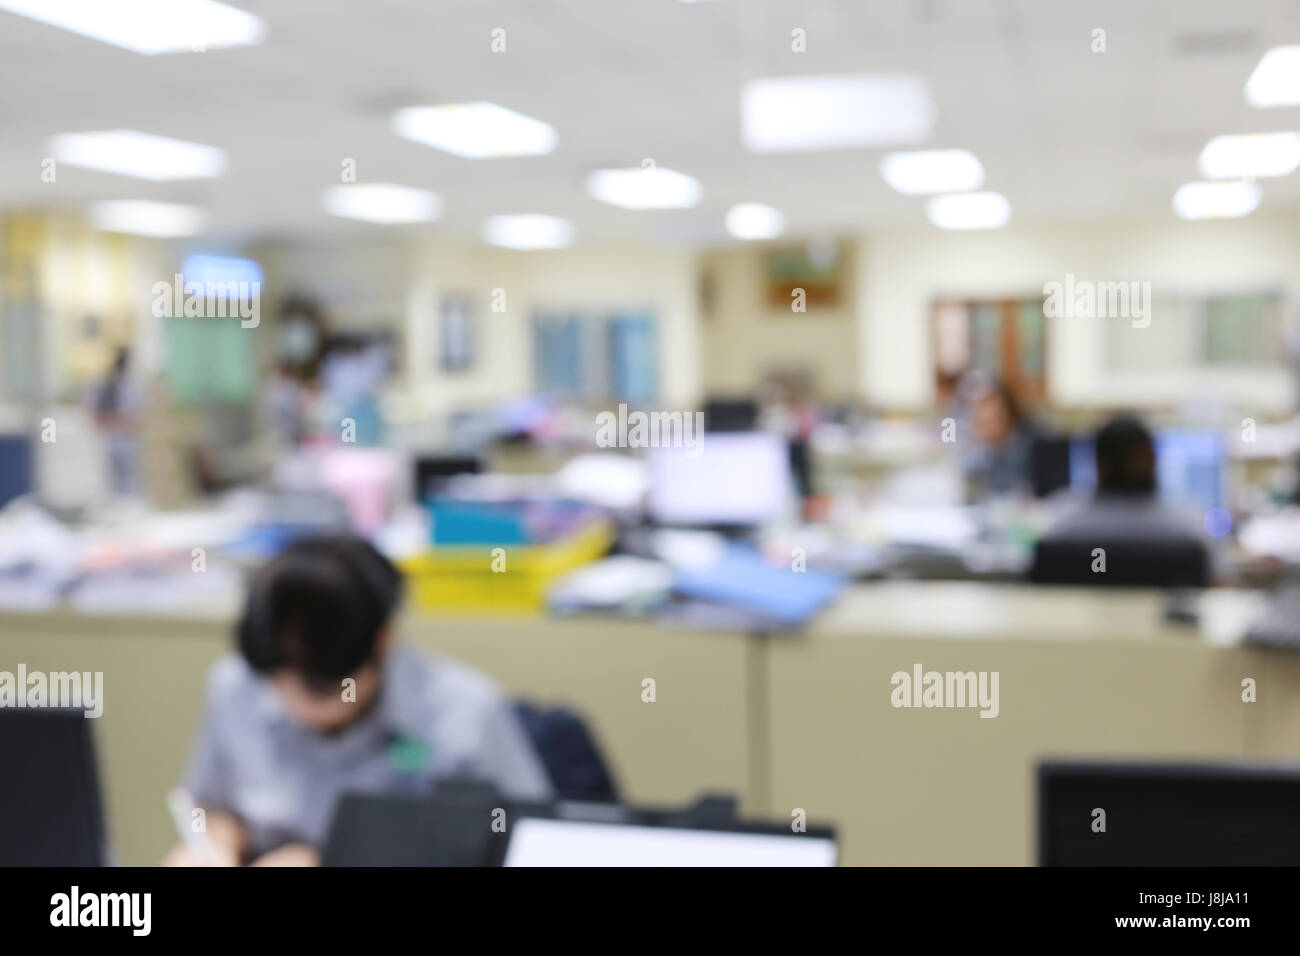 Blur background of interior office for design backdrop. Stock Photo